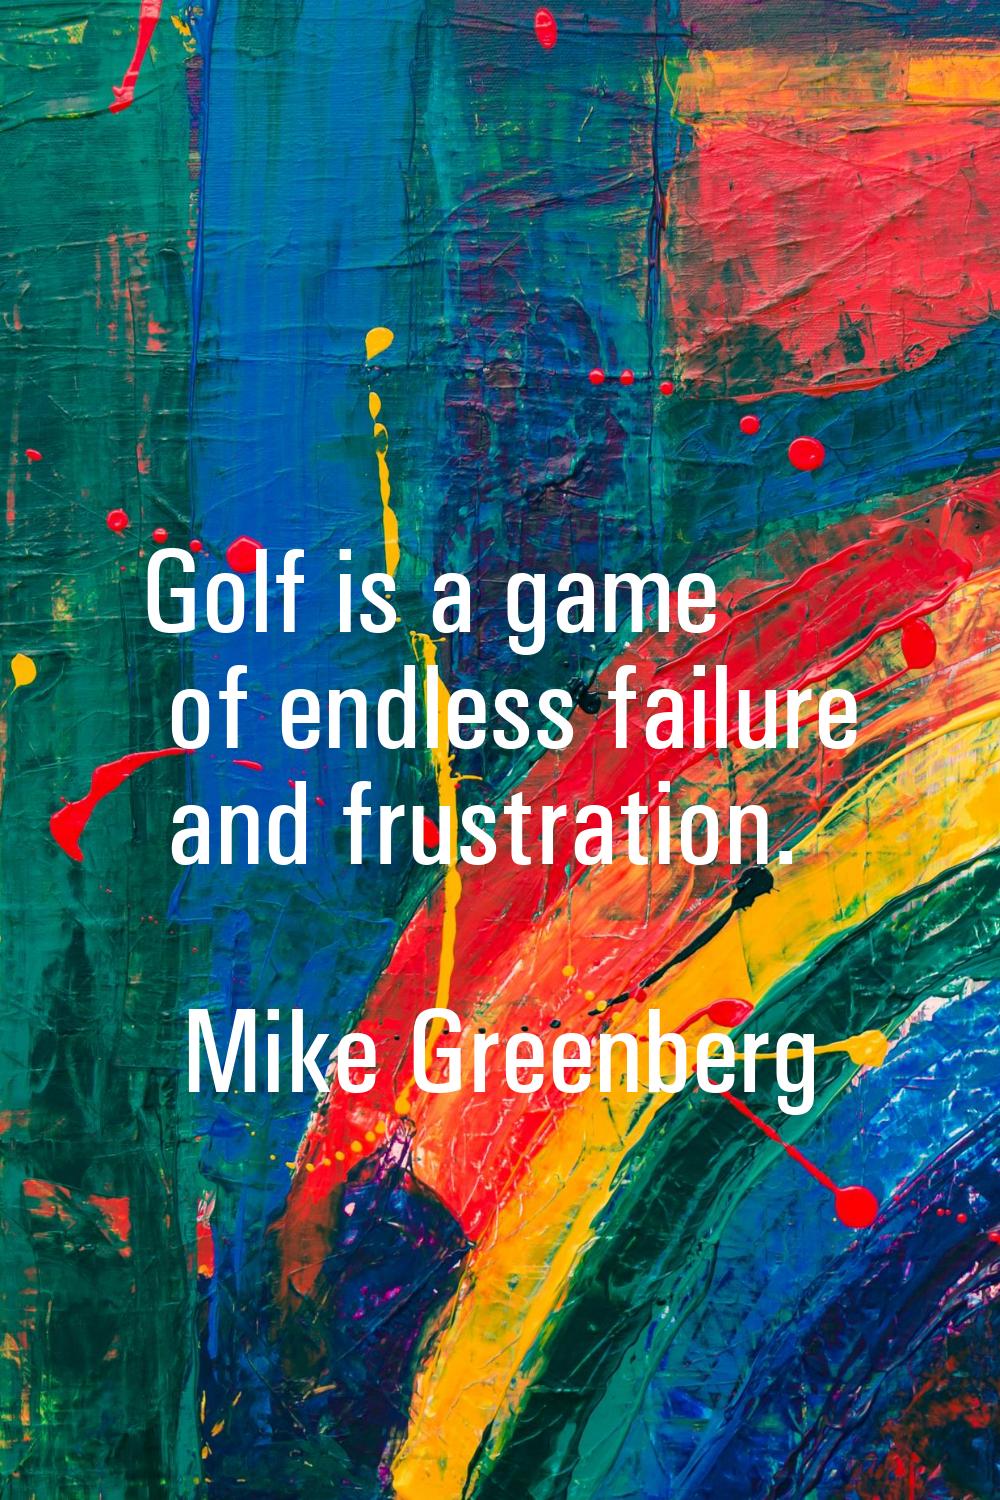 Golf is a game of endless failure and frustration.